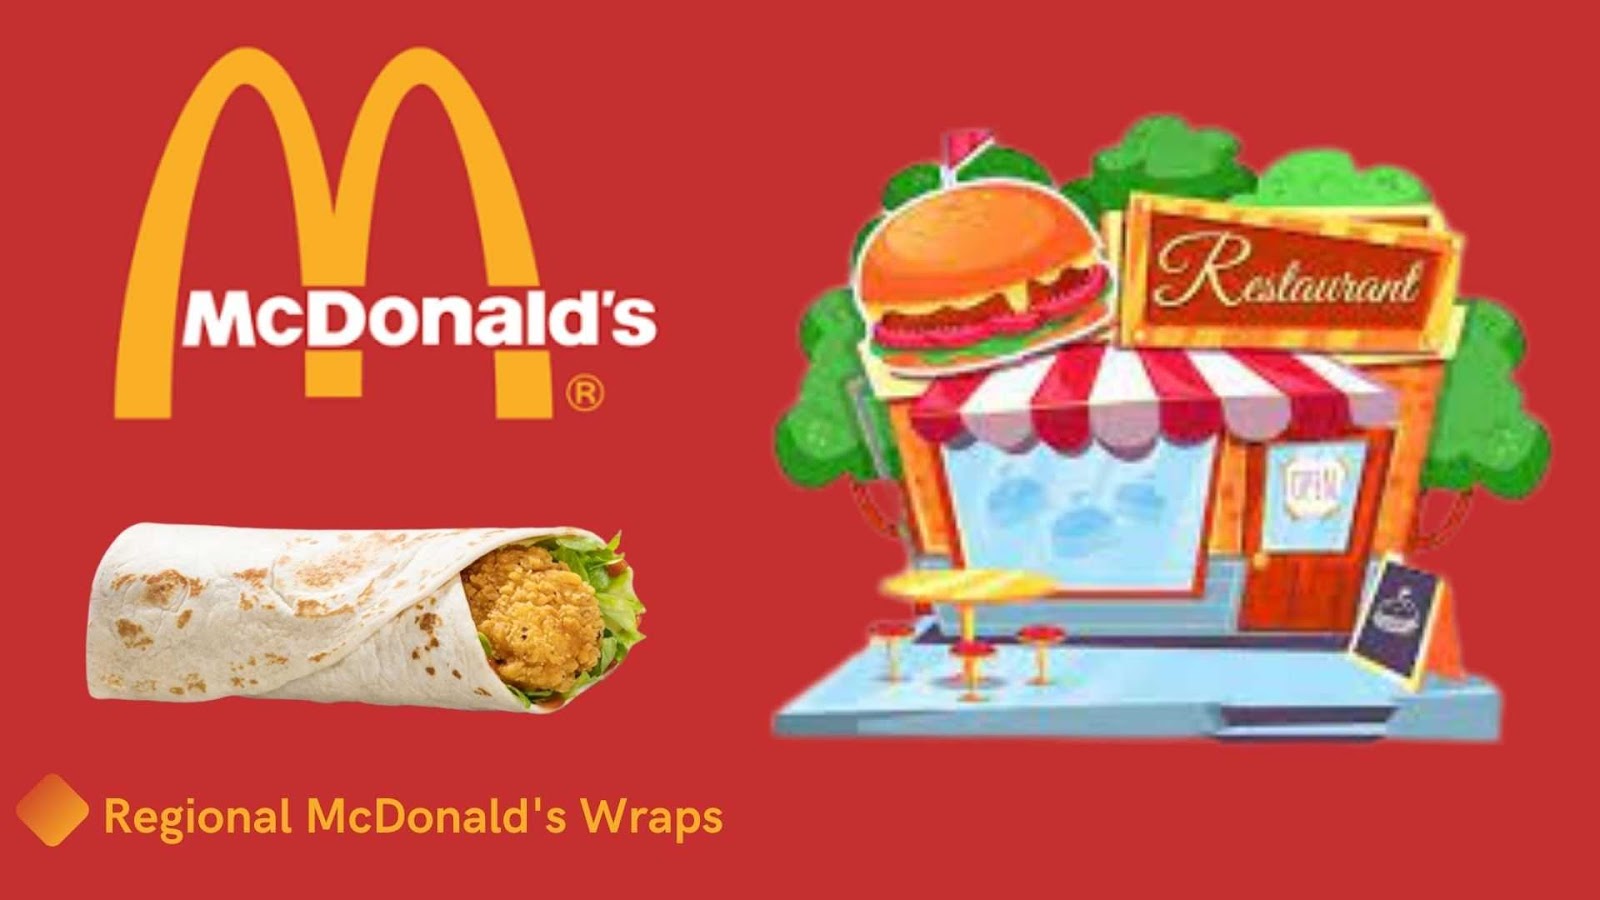 Regional McDonald's Wraps That I Can't Find Elsewhere